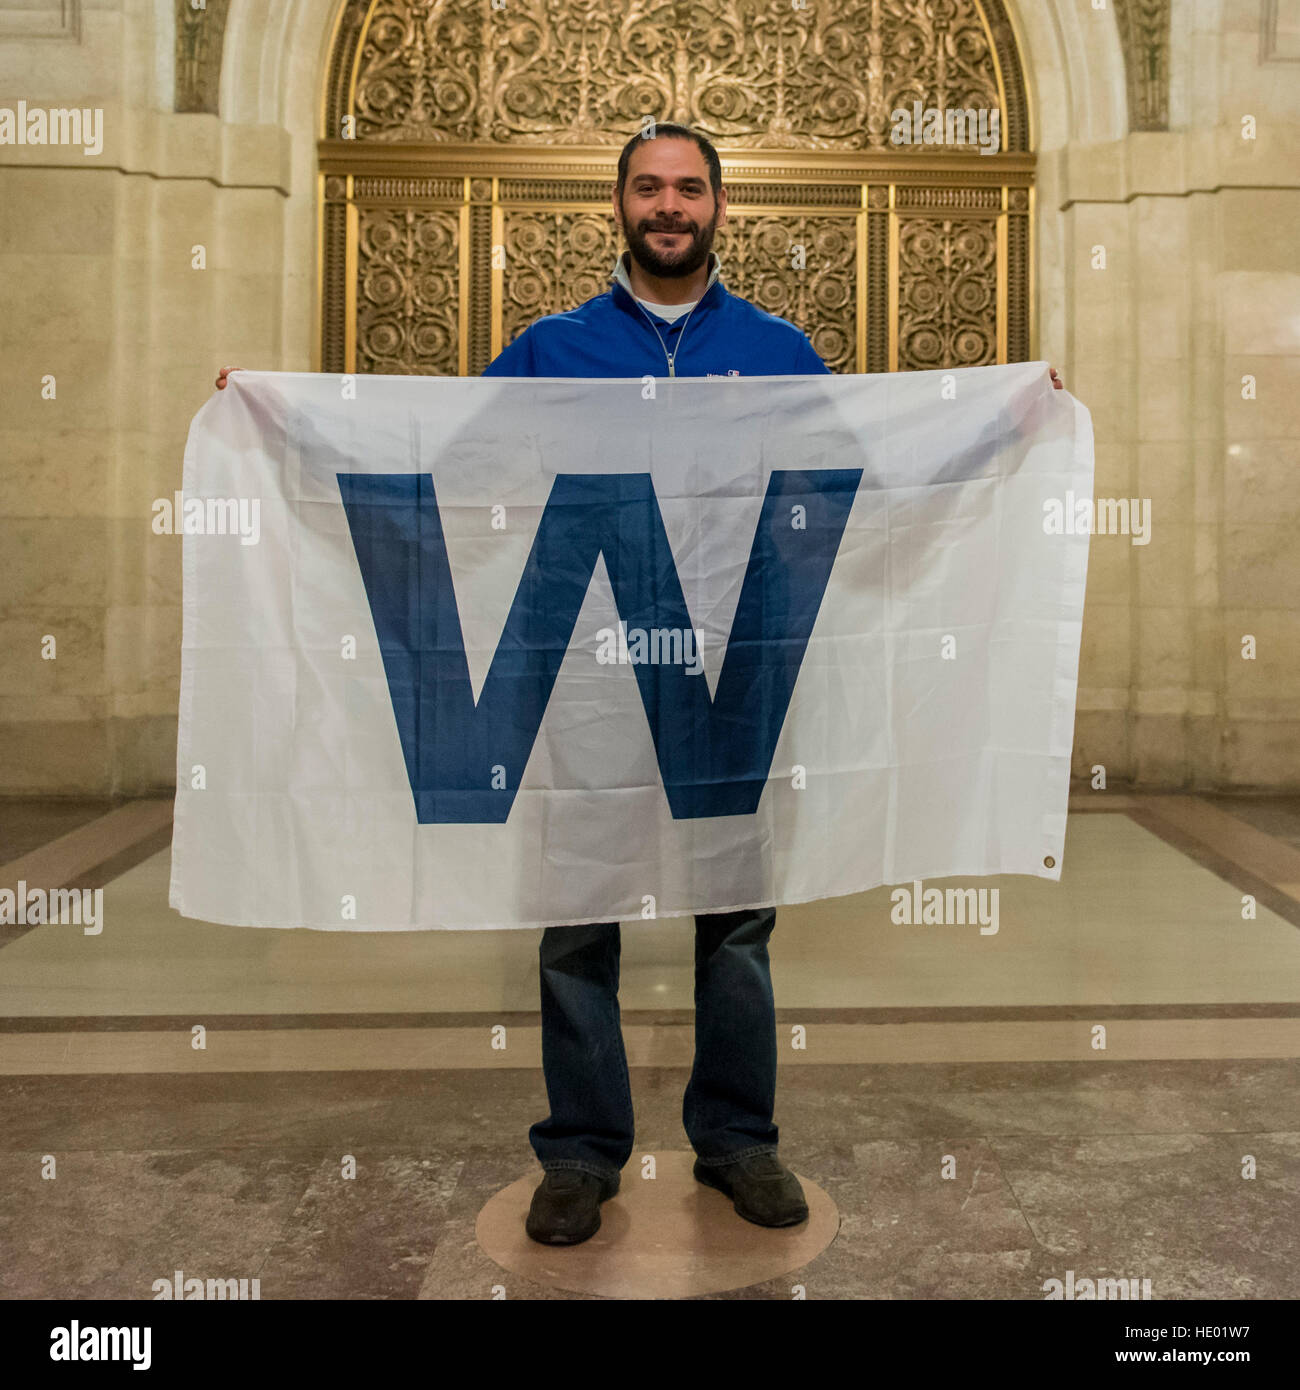 Banners Fly at Wrigley Field, Chicago after Cubs World Series Win Editorial  Stock Image - Image of winning, baseball: 84704089